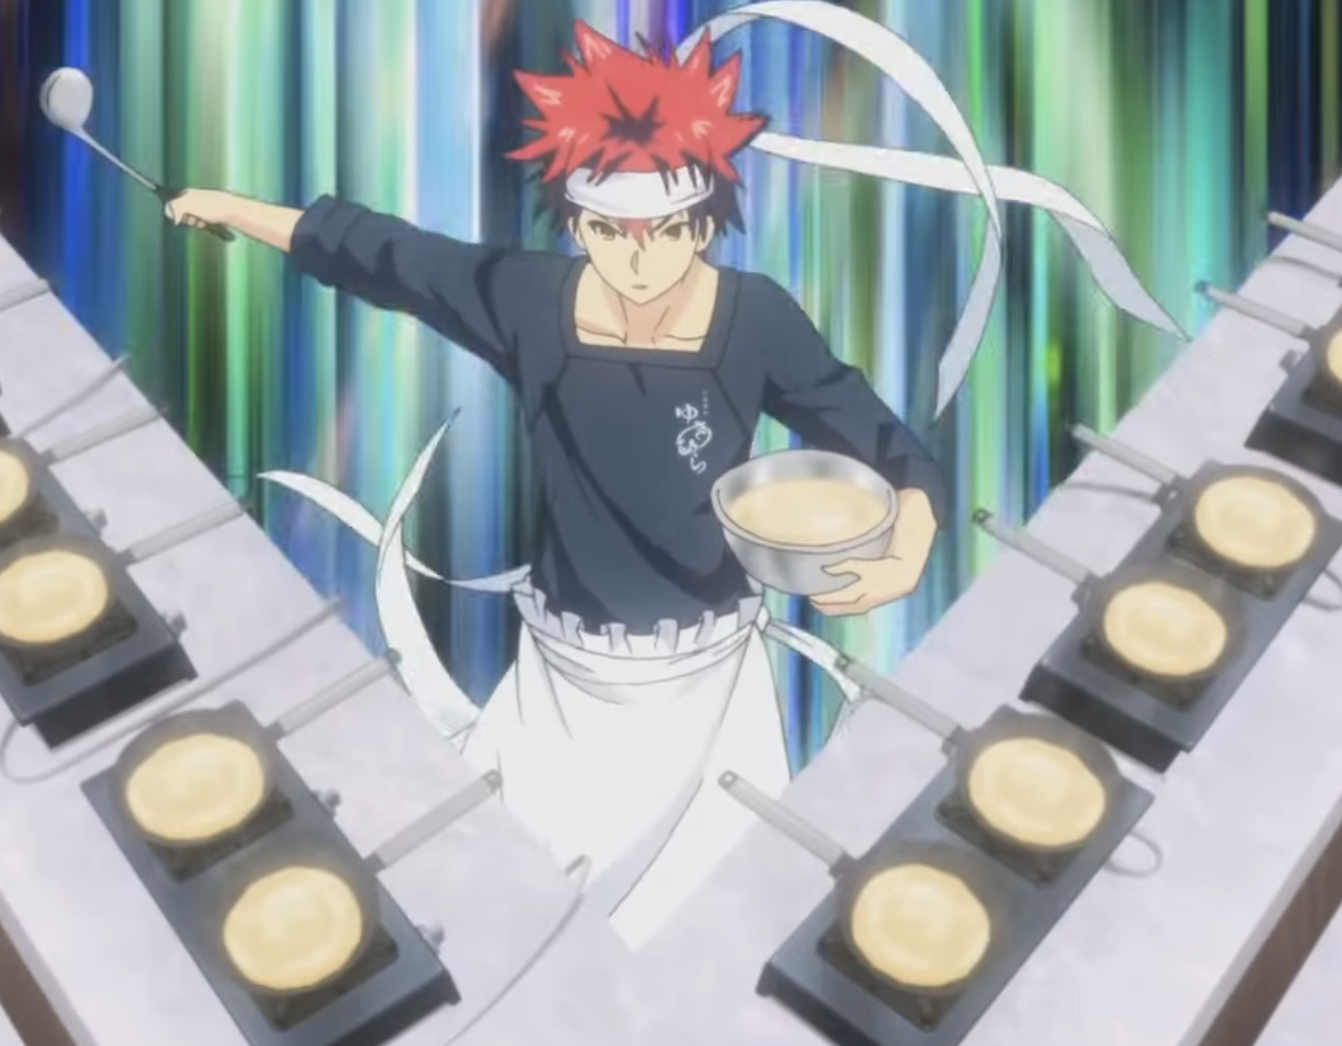 Soma cooking multiple dishes at the same time